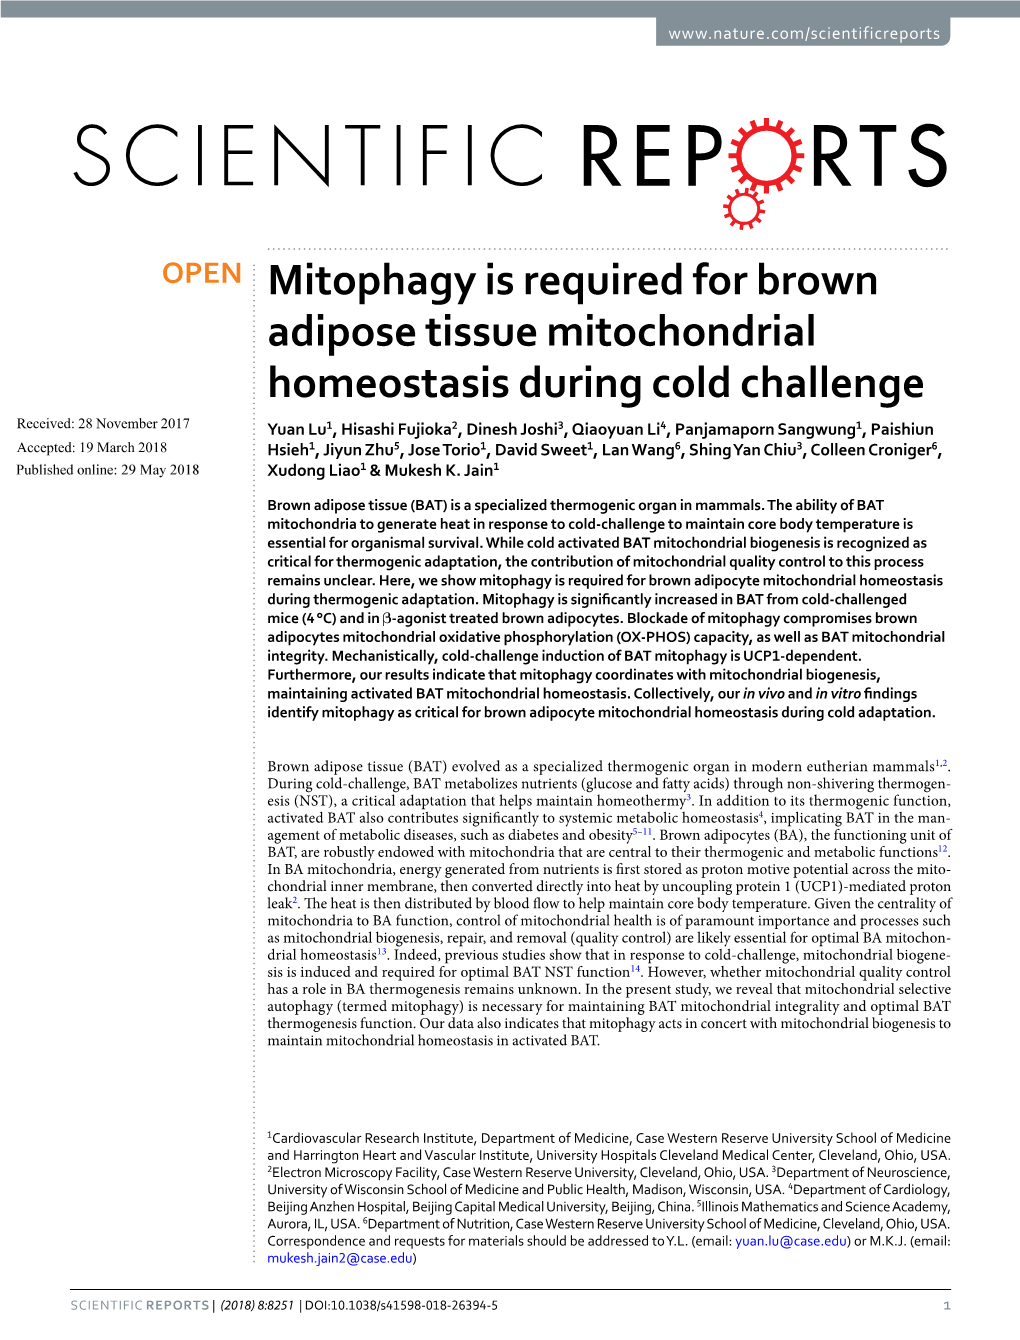 Mitophagy Is Required for Brown Adipose Tissue Mitochondrial